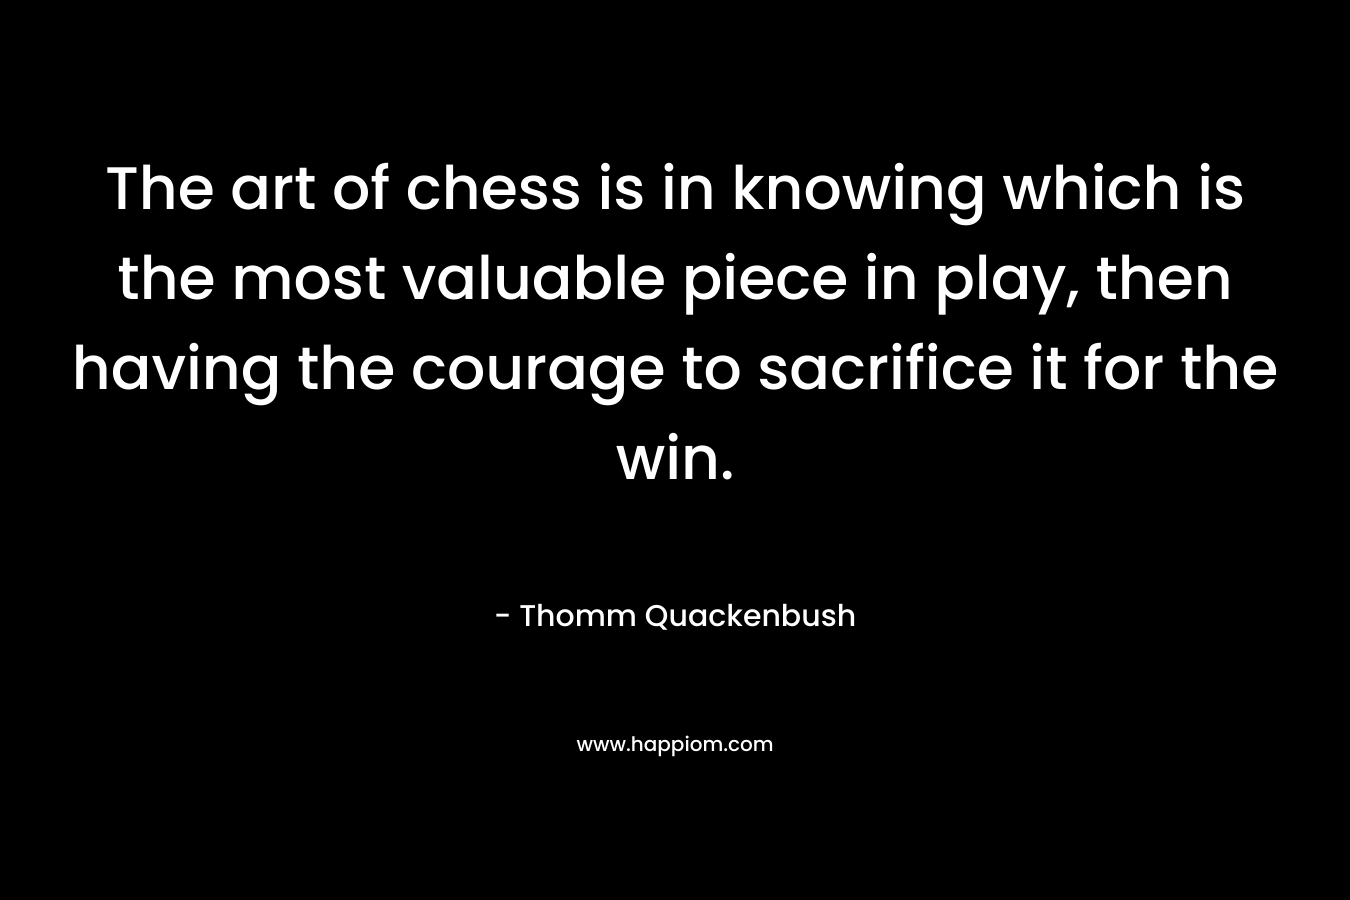 The art of chess is in knowing which is the most valuable piece in play, then having the courage to sacrifice it for the win. – Thomm Quackenbush